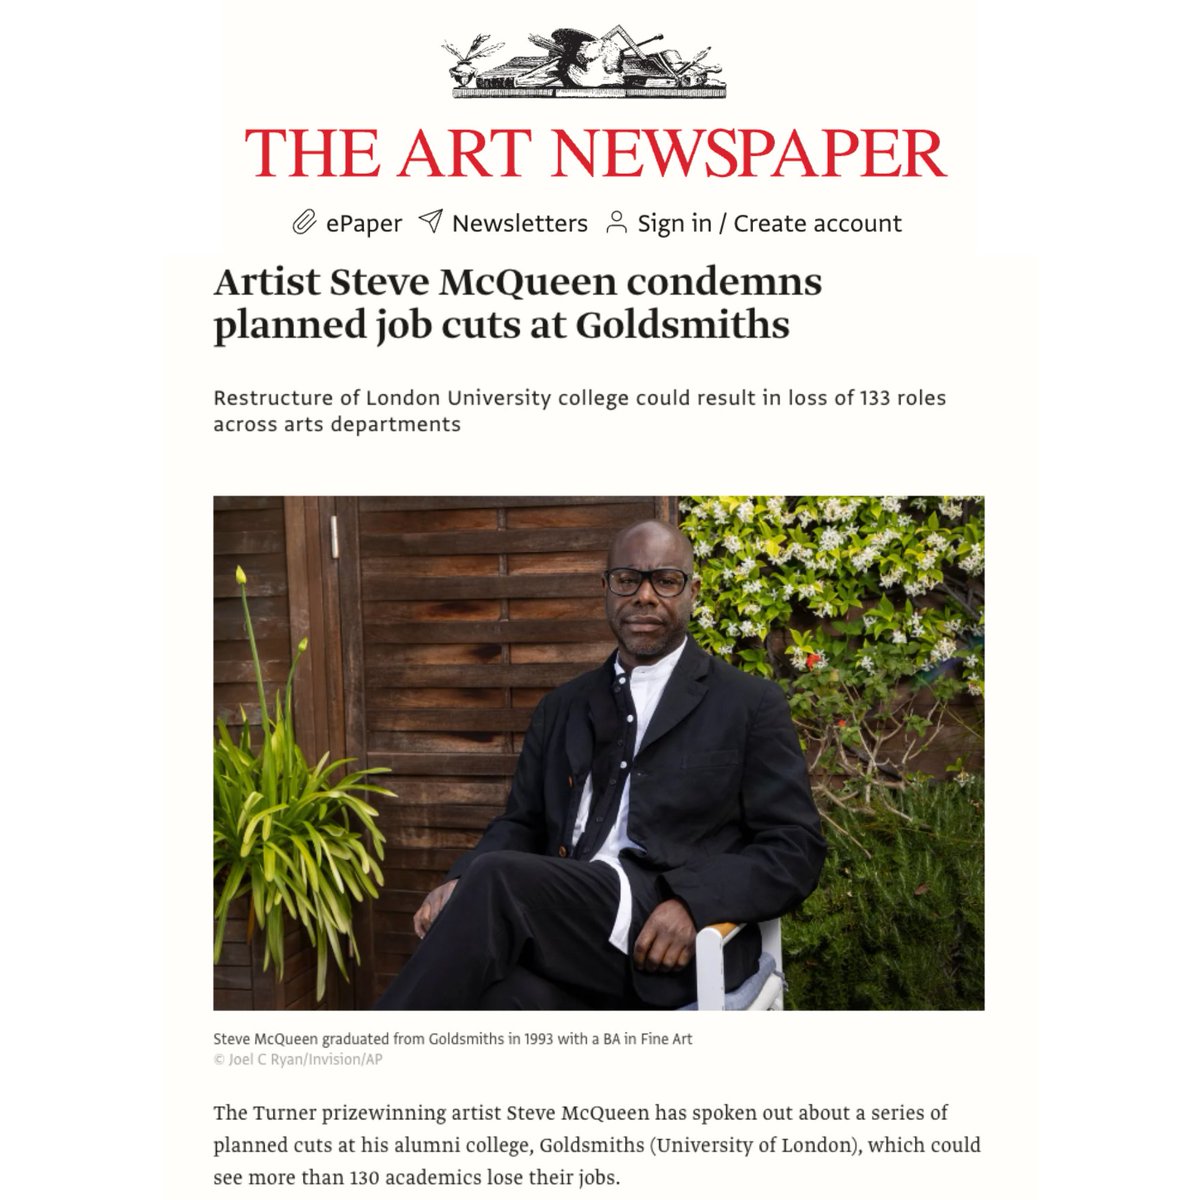 📢 The Art Newspaper reports that Oscar-winning director Steve McQueen hopes managers will reconsider the unprecedented and unnecessary cuts at Goldsmiths. It seems the media care about this story. What about senior management? #binthetp